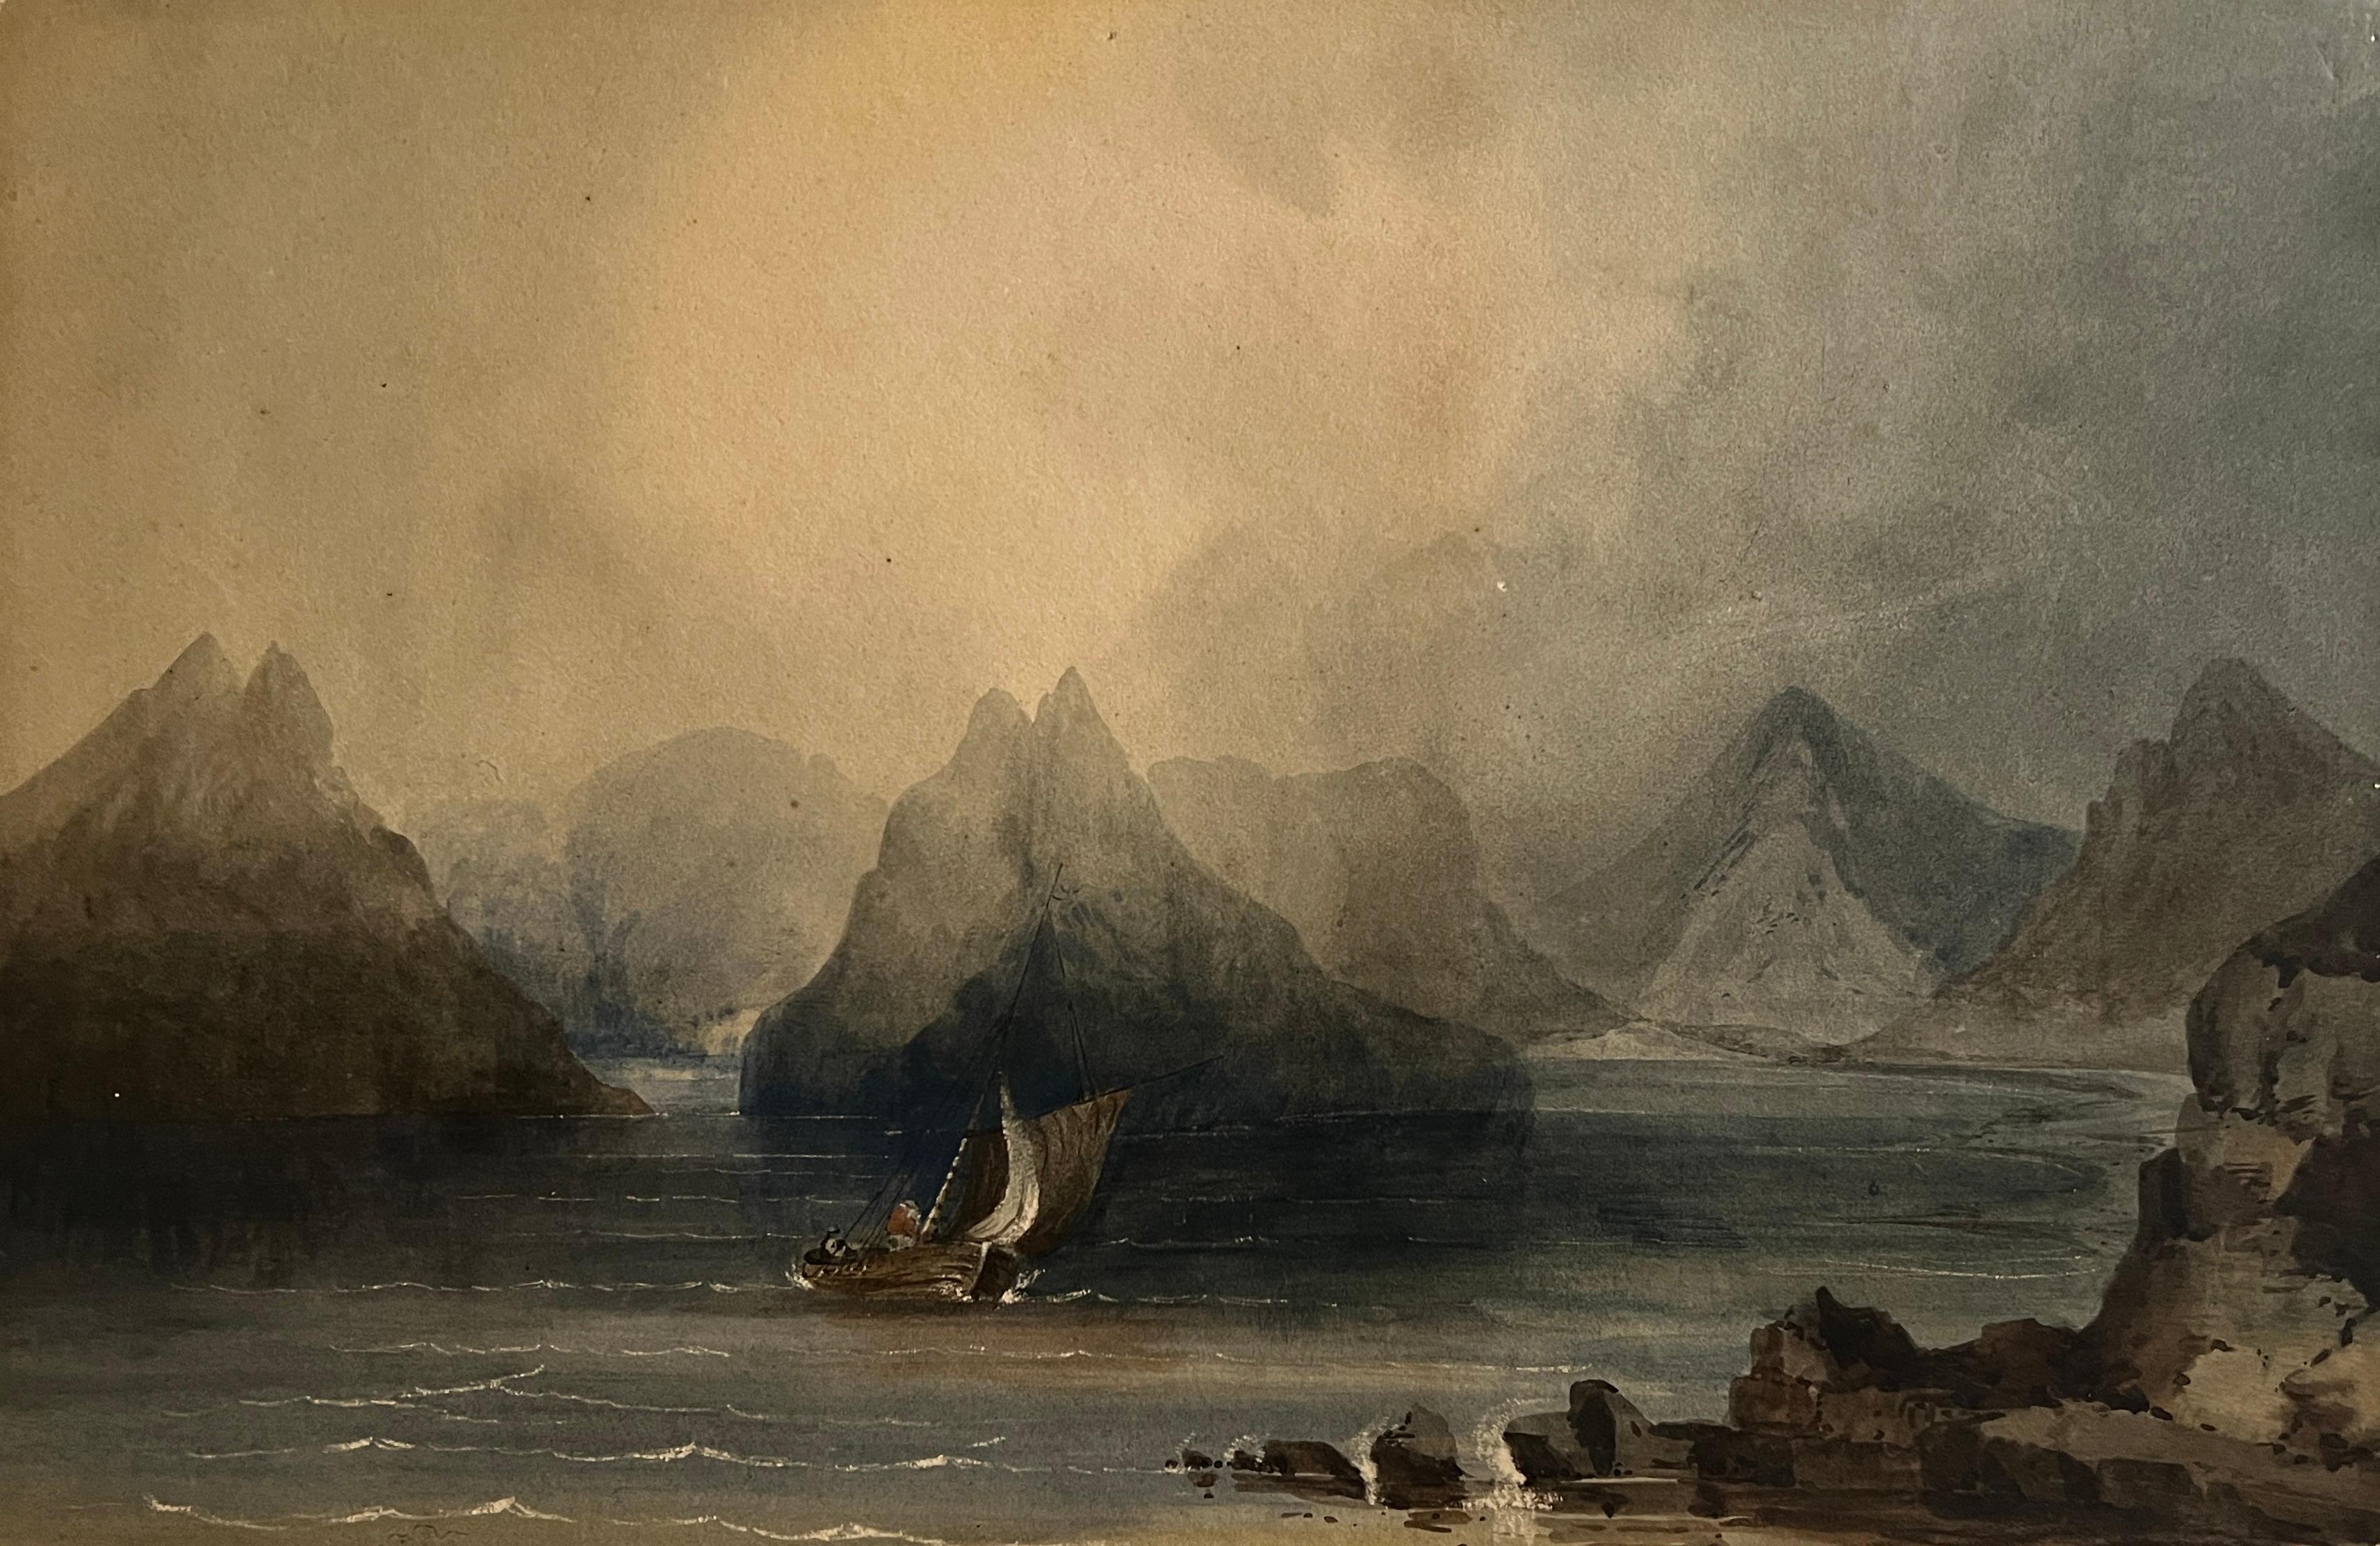 Charles Darwin in the Beagle’s Tender, Coastal Patagonia, Argentina 19th cent wc - Painting by Conrad Martens